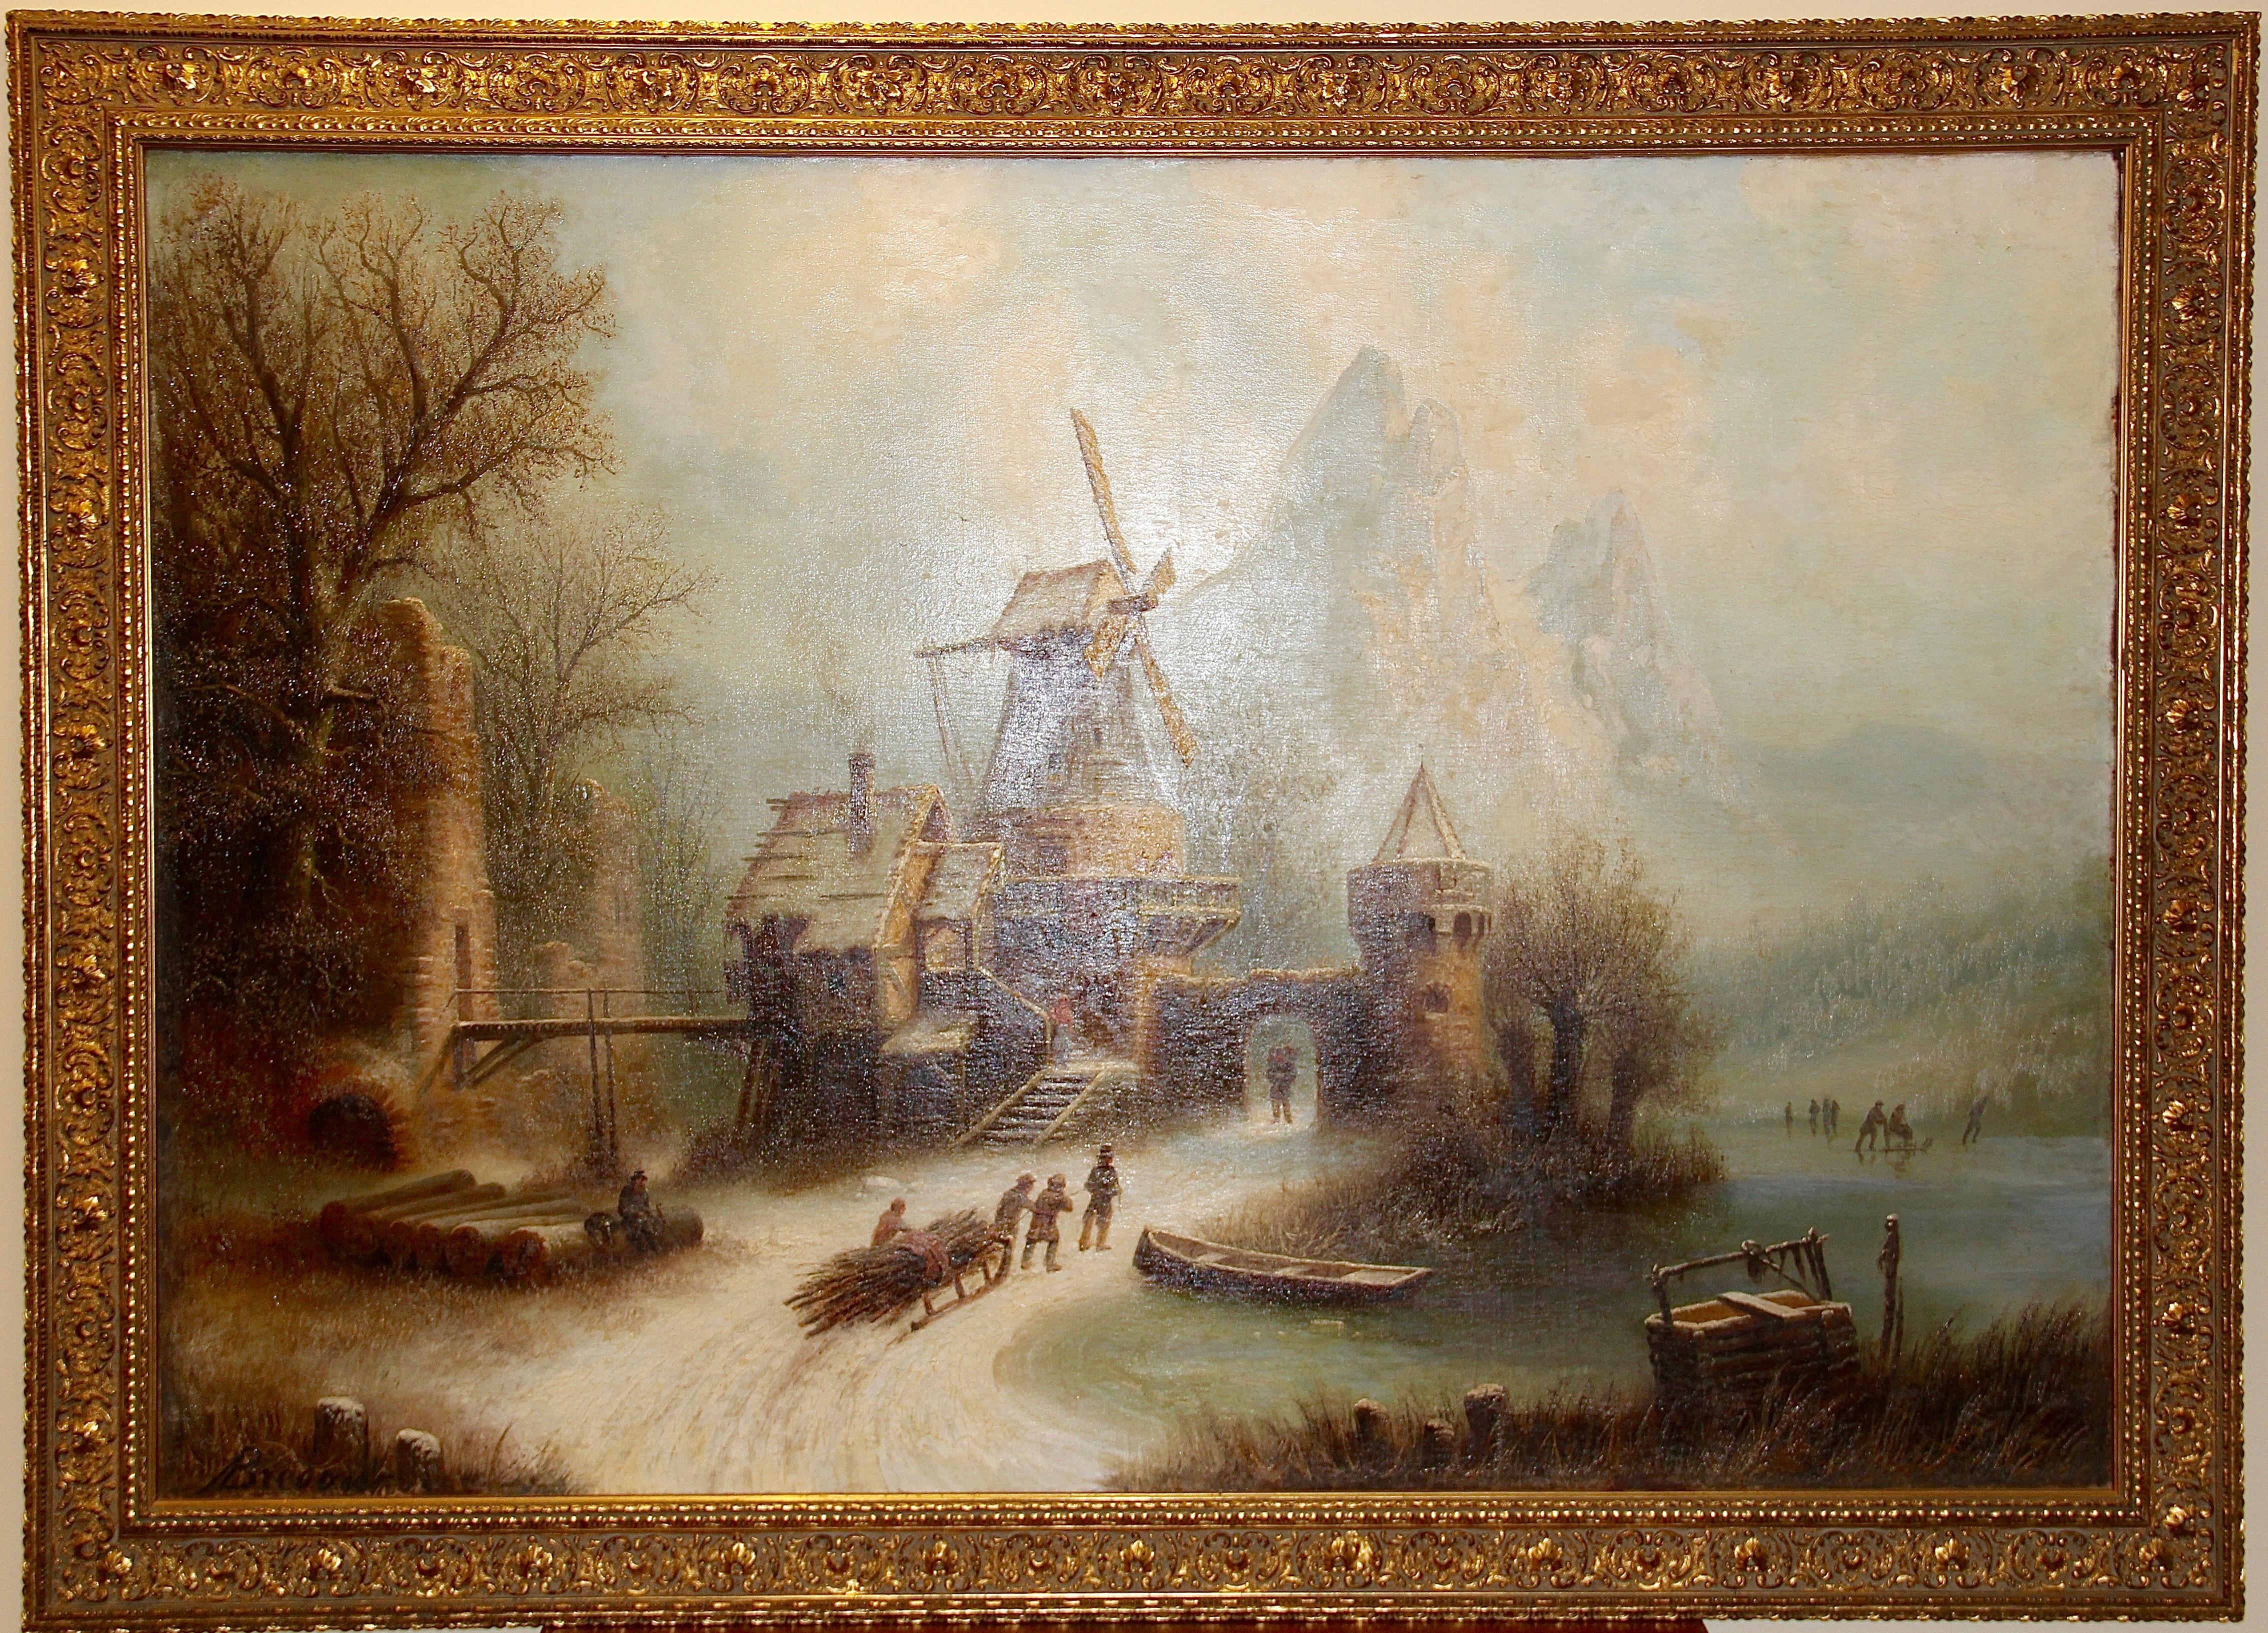 Romantic Winter Landscape with Ice Skaters. Oil on canvas. 19. century. - Painting by Alfred Bredow